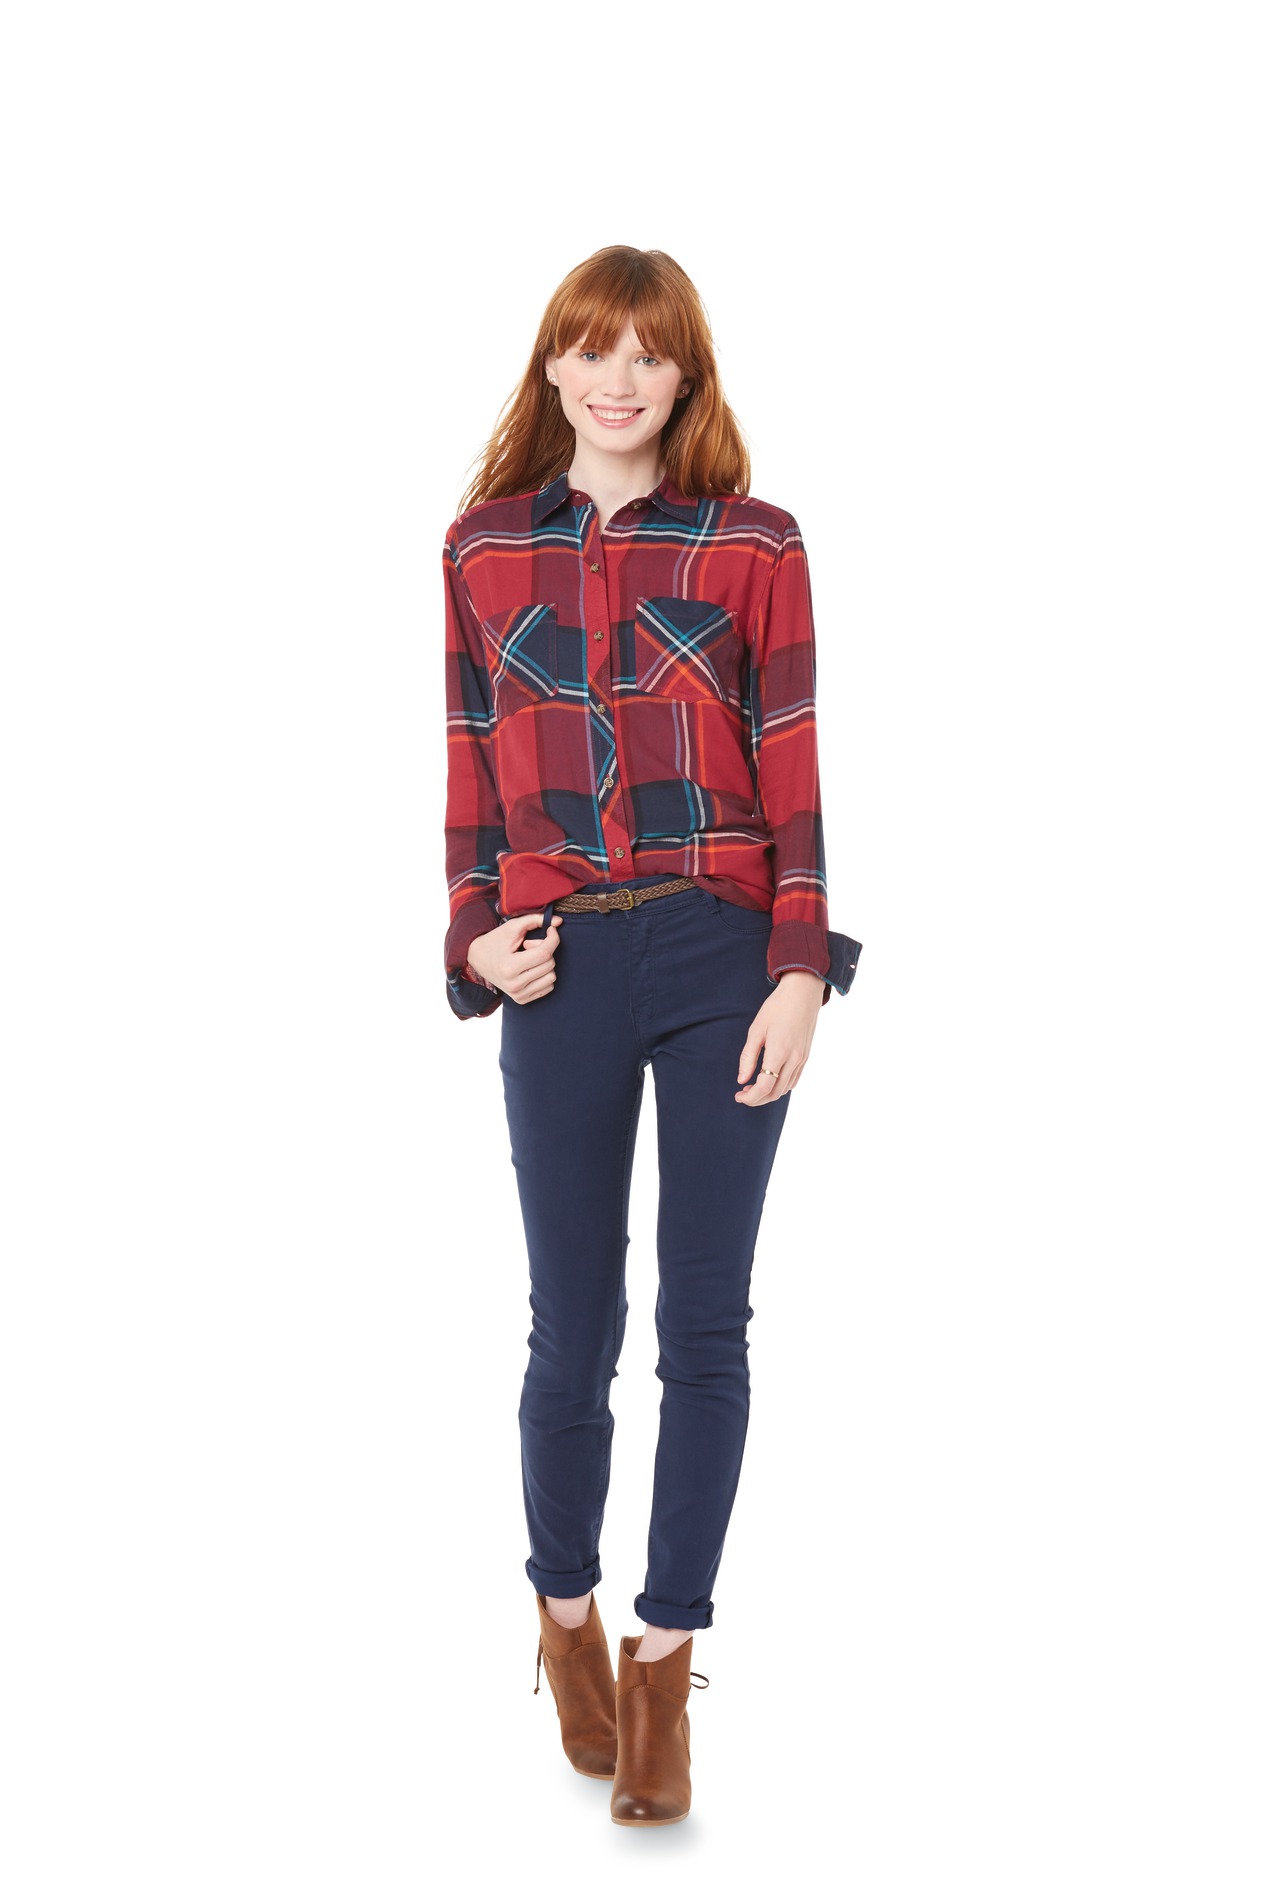 Simply Styled Women's Flannel Plaid Shirt